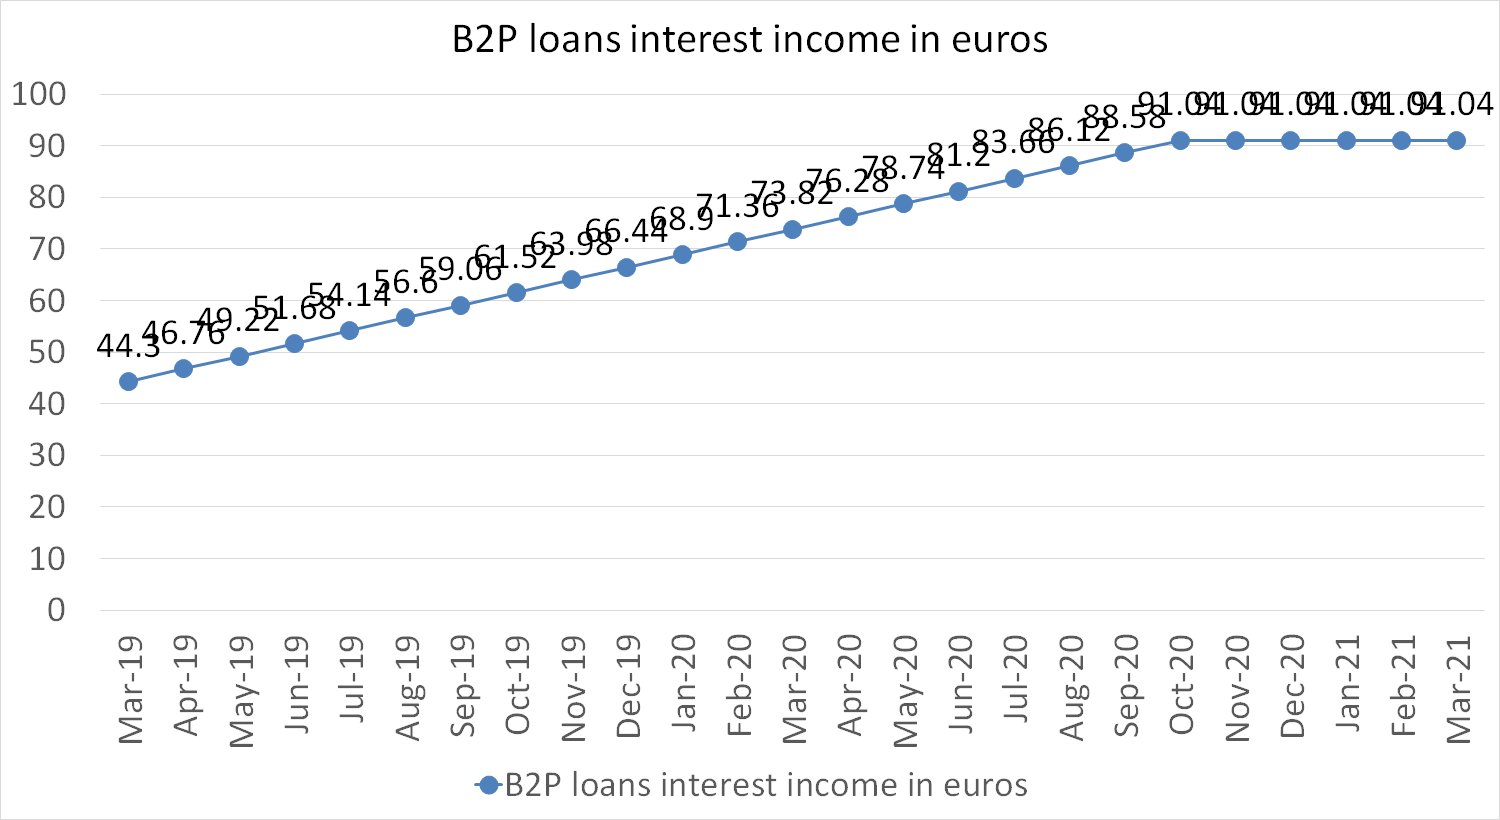 B2P loans interest income in euros march 2021